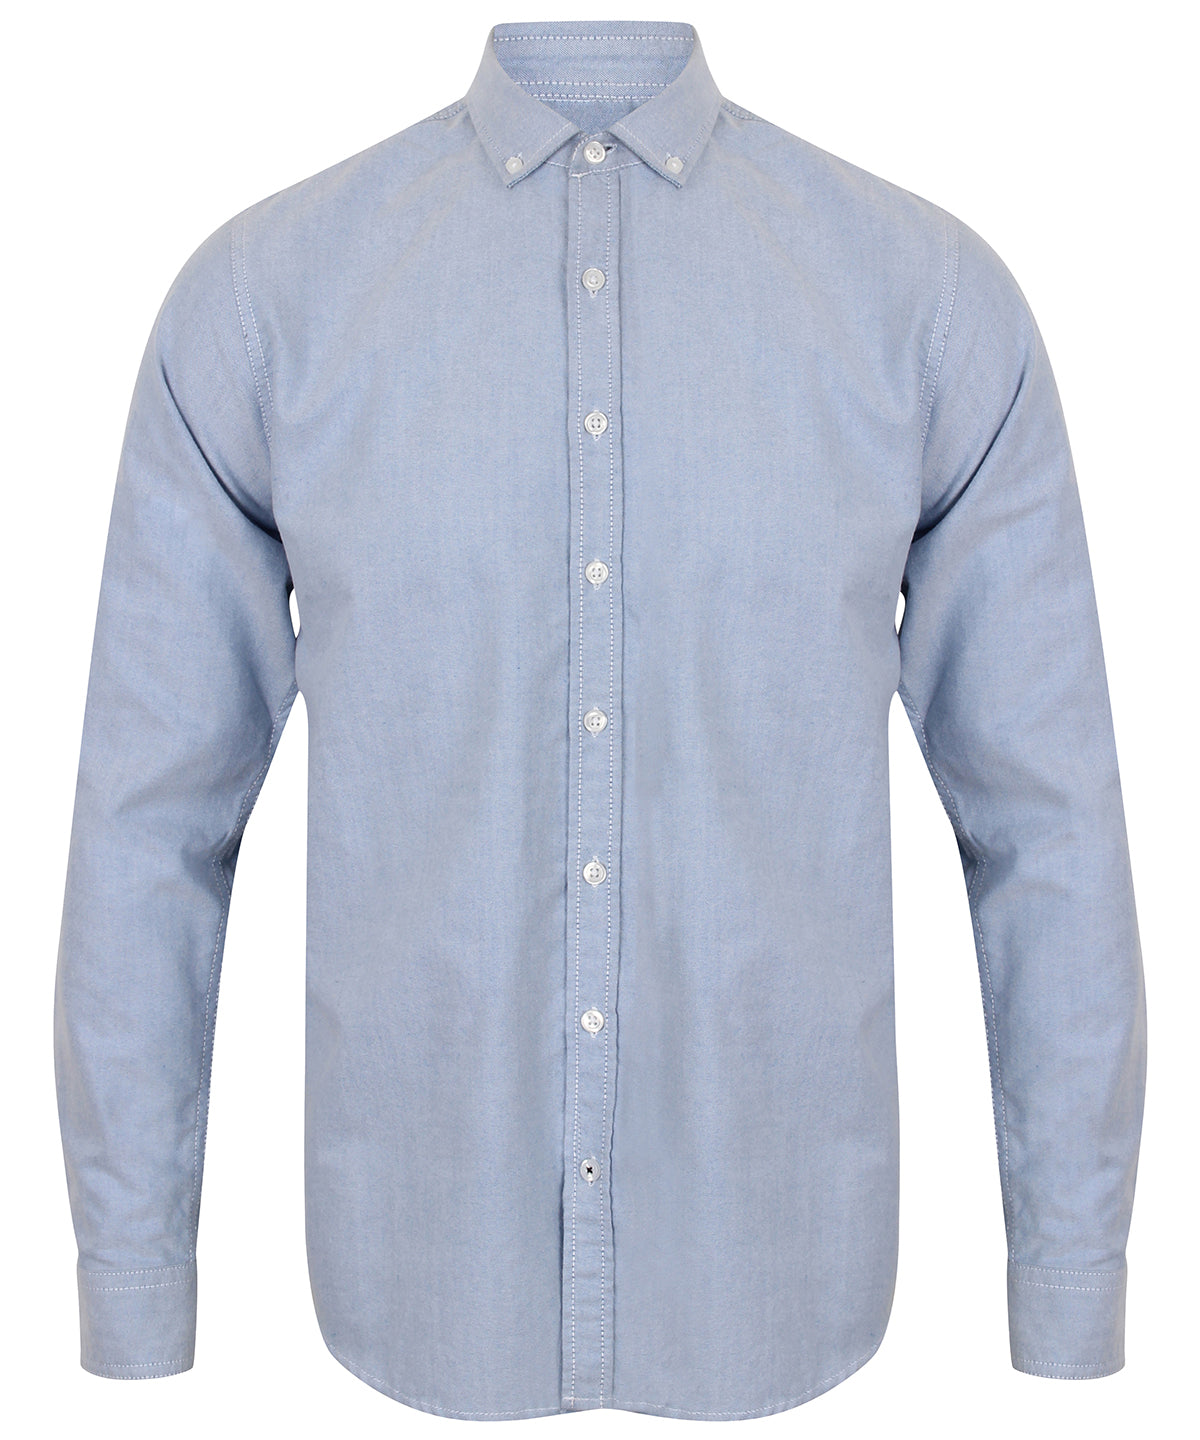 FR502 Front Row Light Blue Supersoft casual shirt